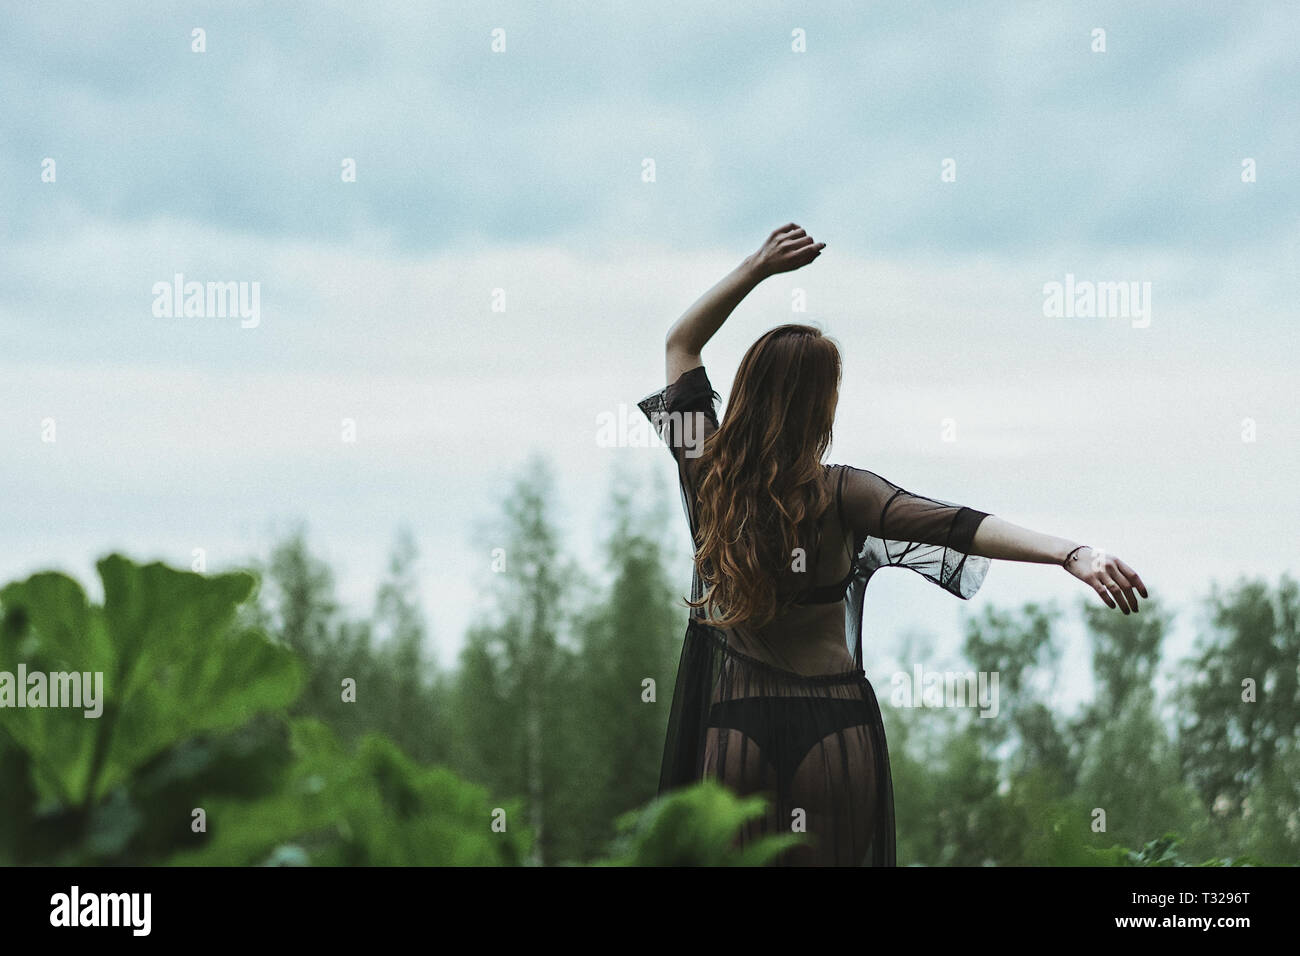 A dark-haired woman in a translucent black dress dancing against the sky and green grass. Relaxation and dreams. Stock Photo